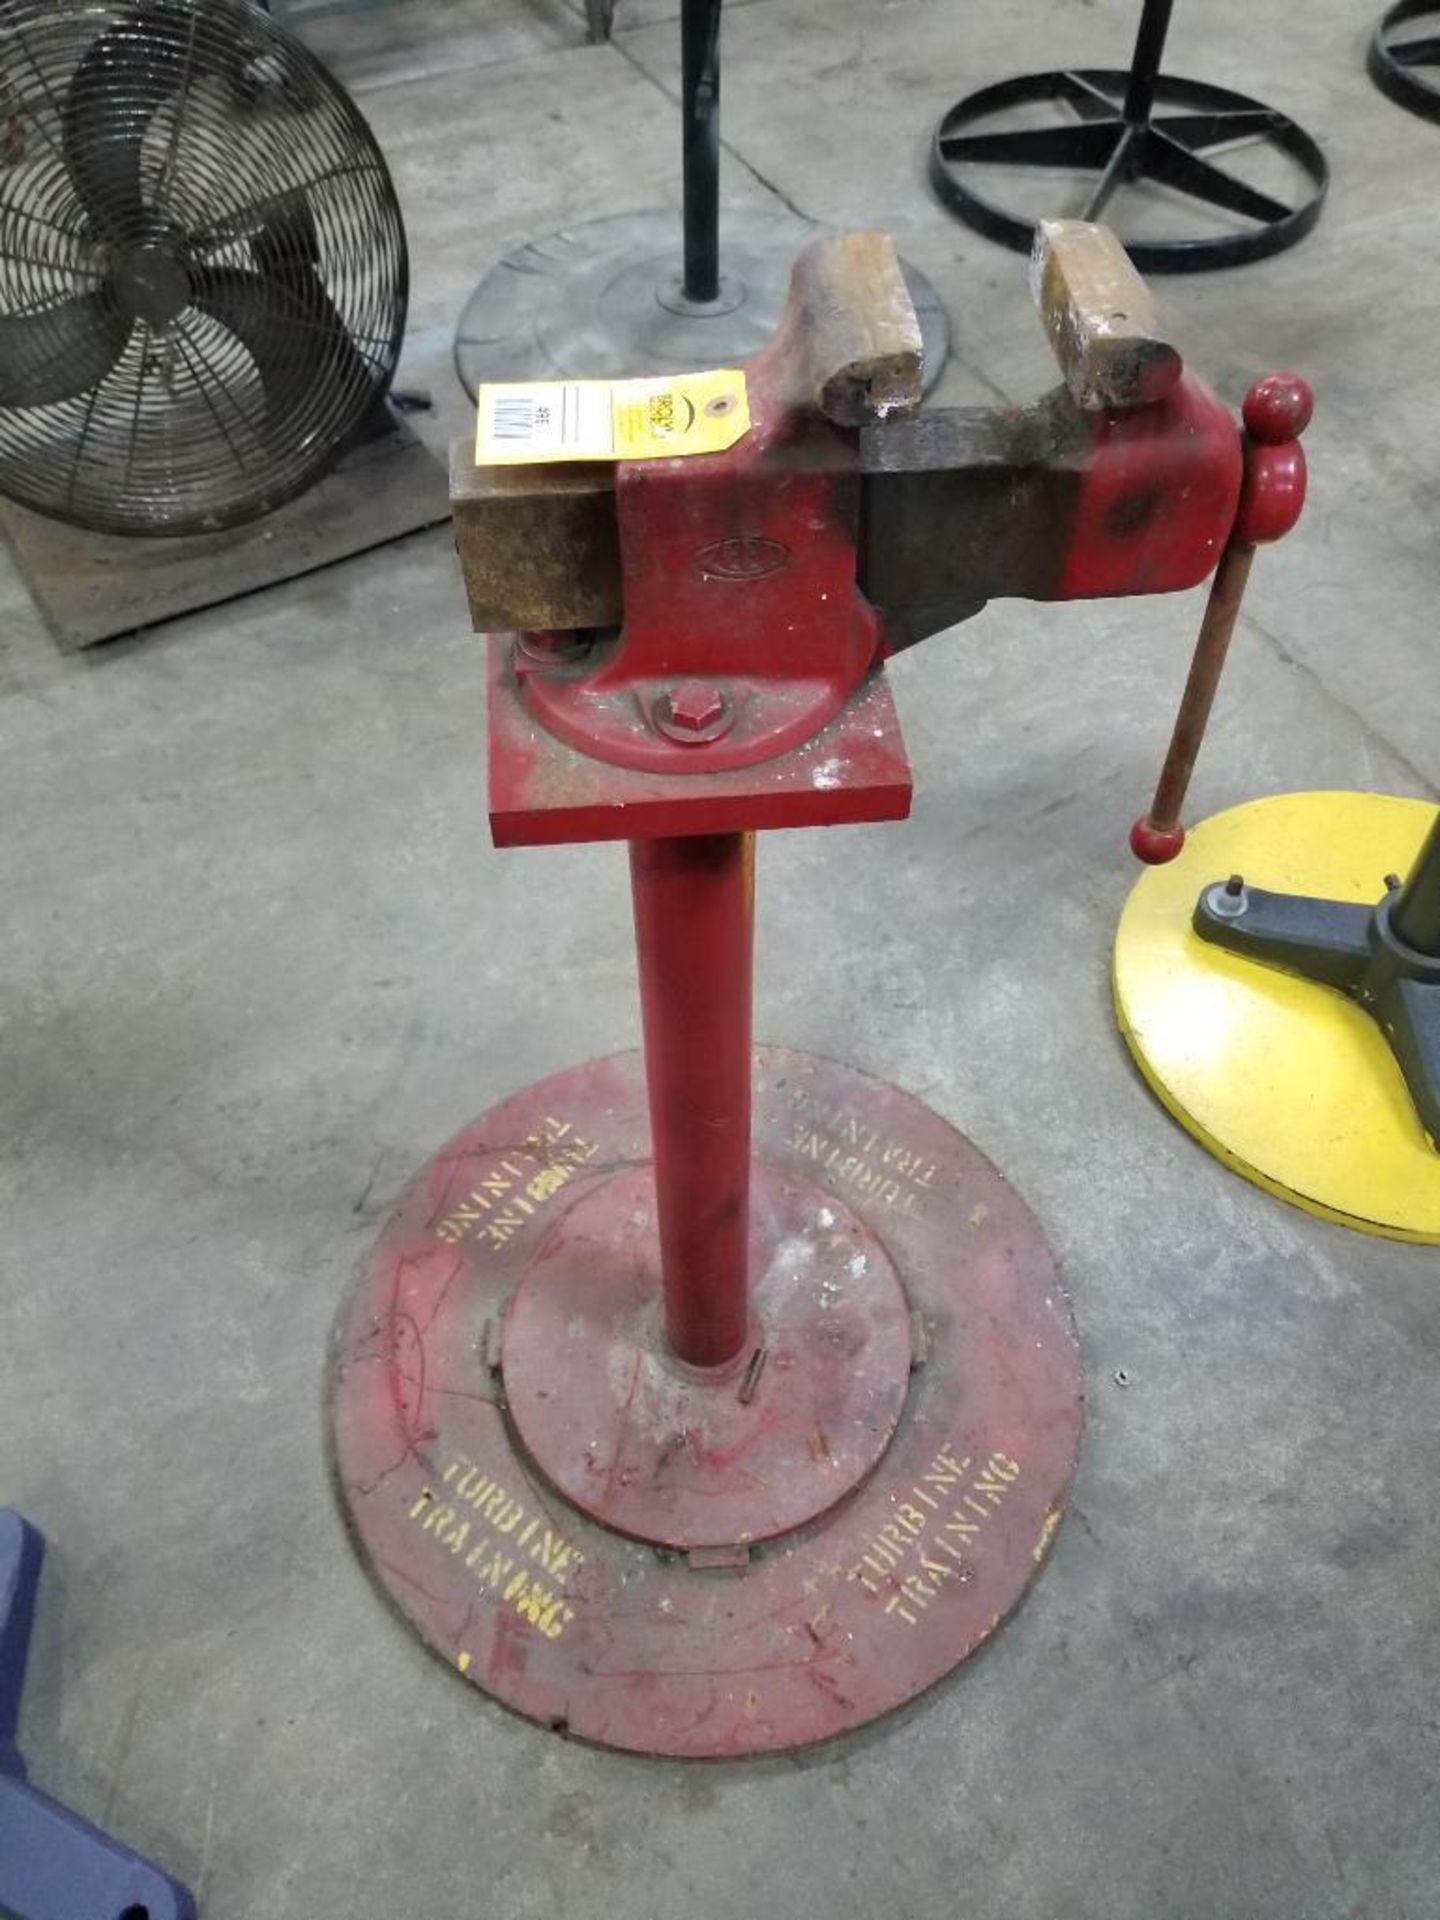 Reed table vise with stand.